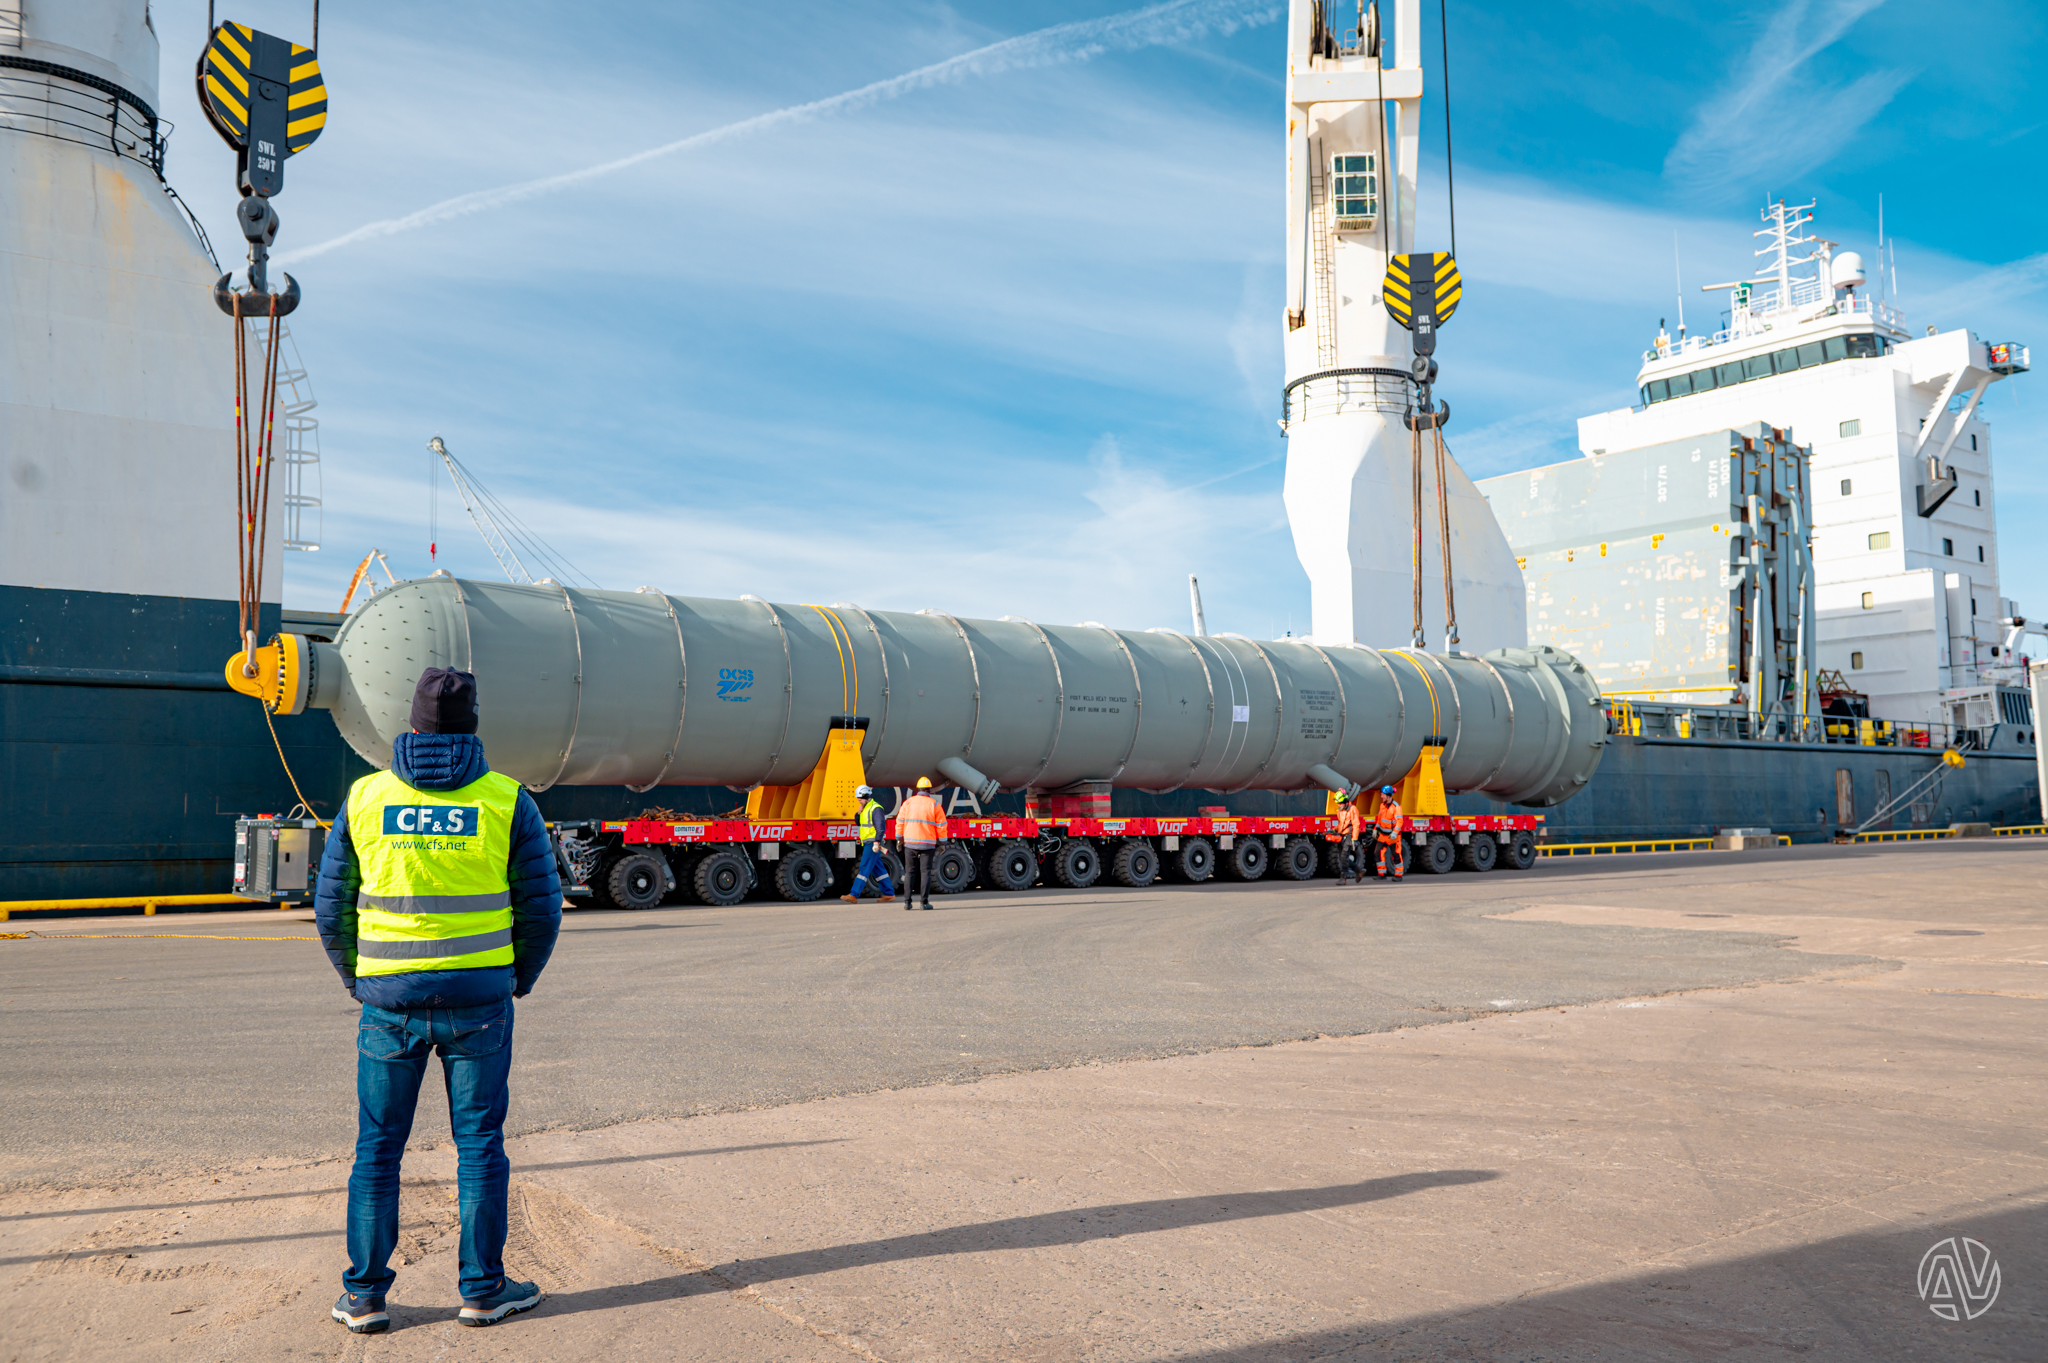 CF&S innovates to move project cargo amidst strike in Finland